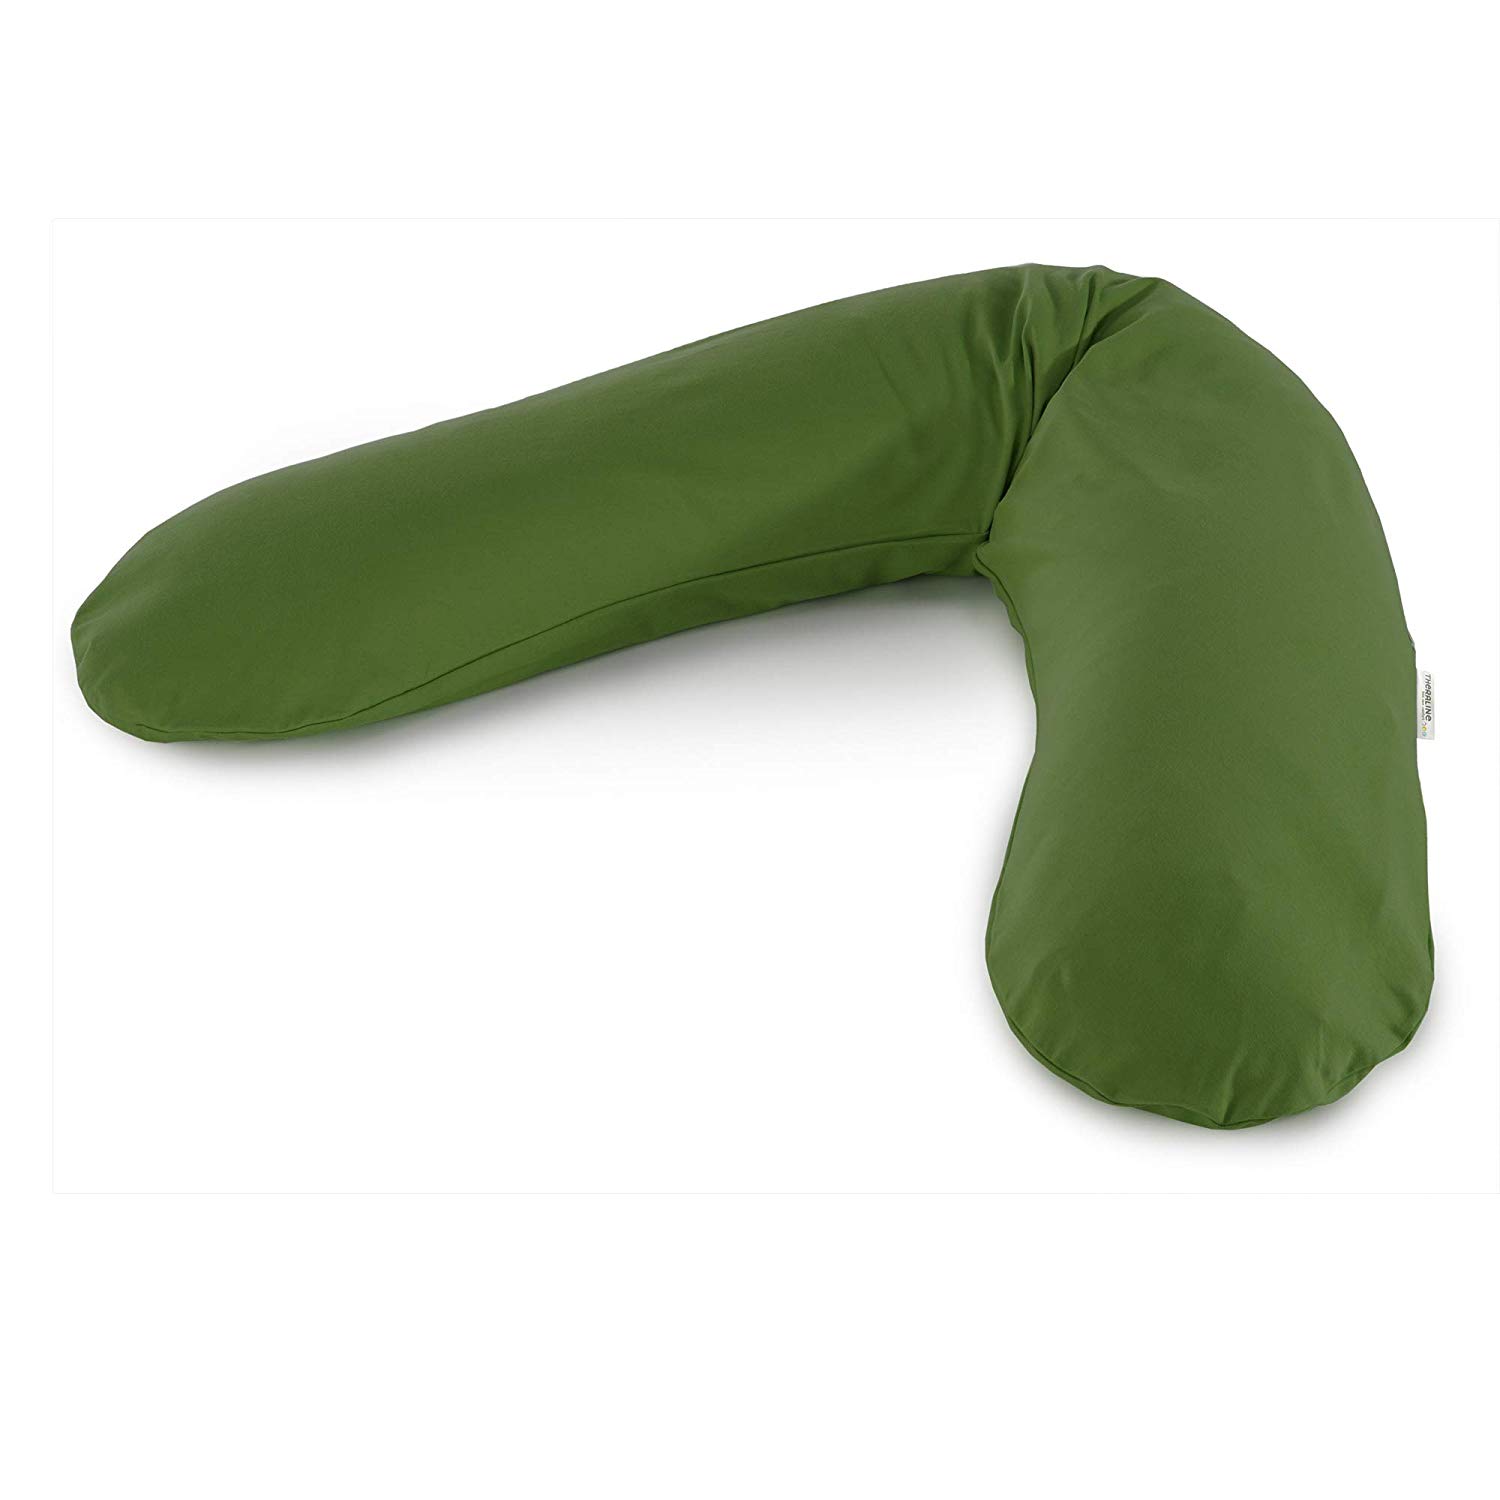 Theraline The original nursing pillow with micro-bead filling including jersey cover, 46 hunter green